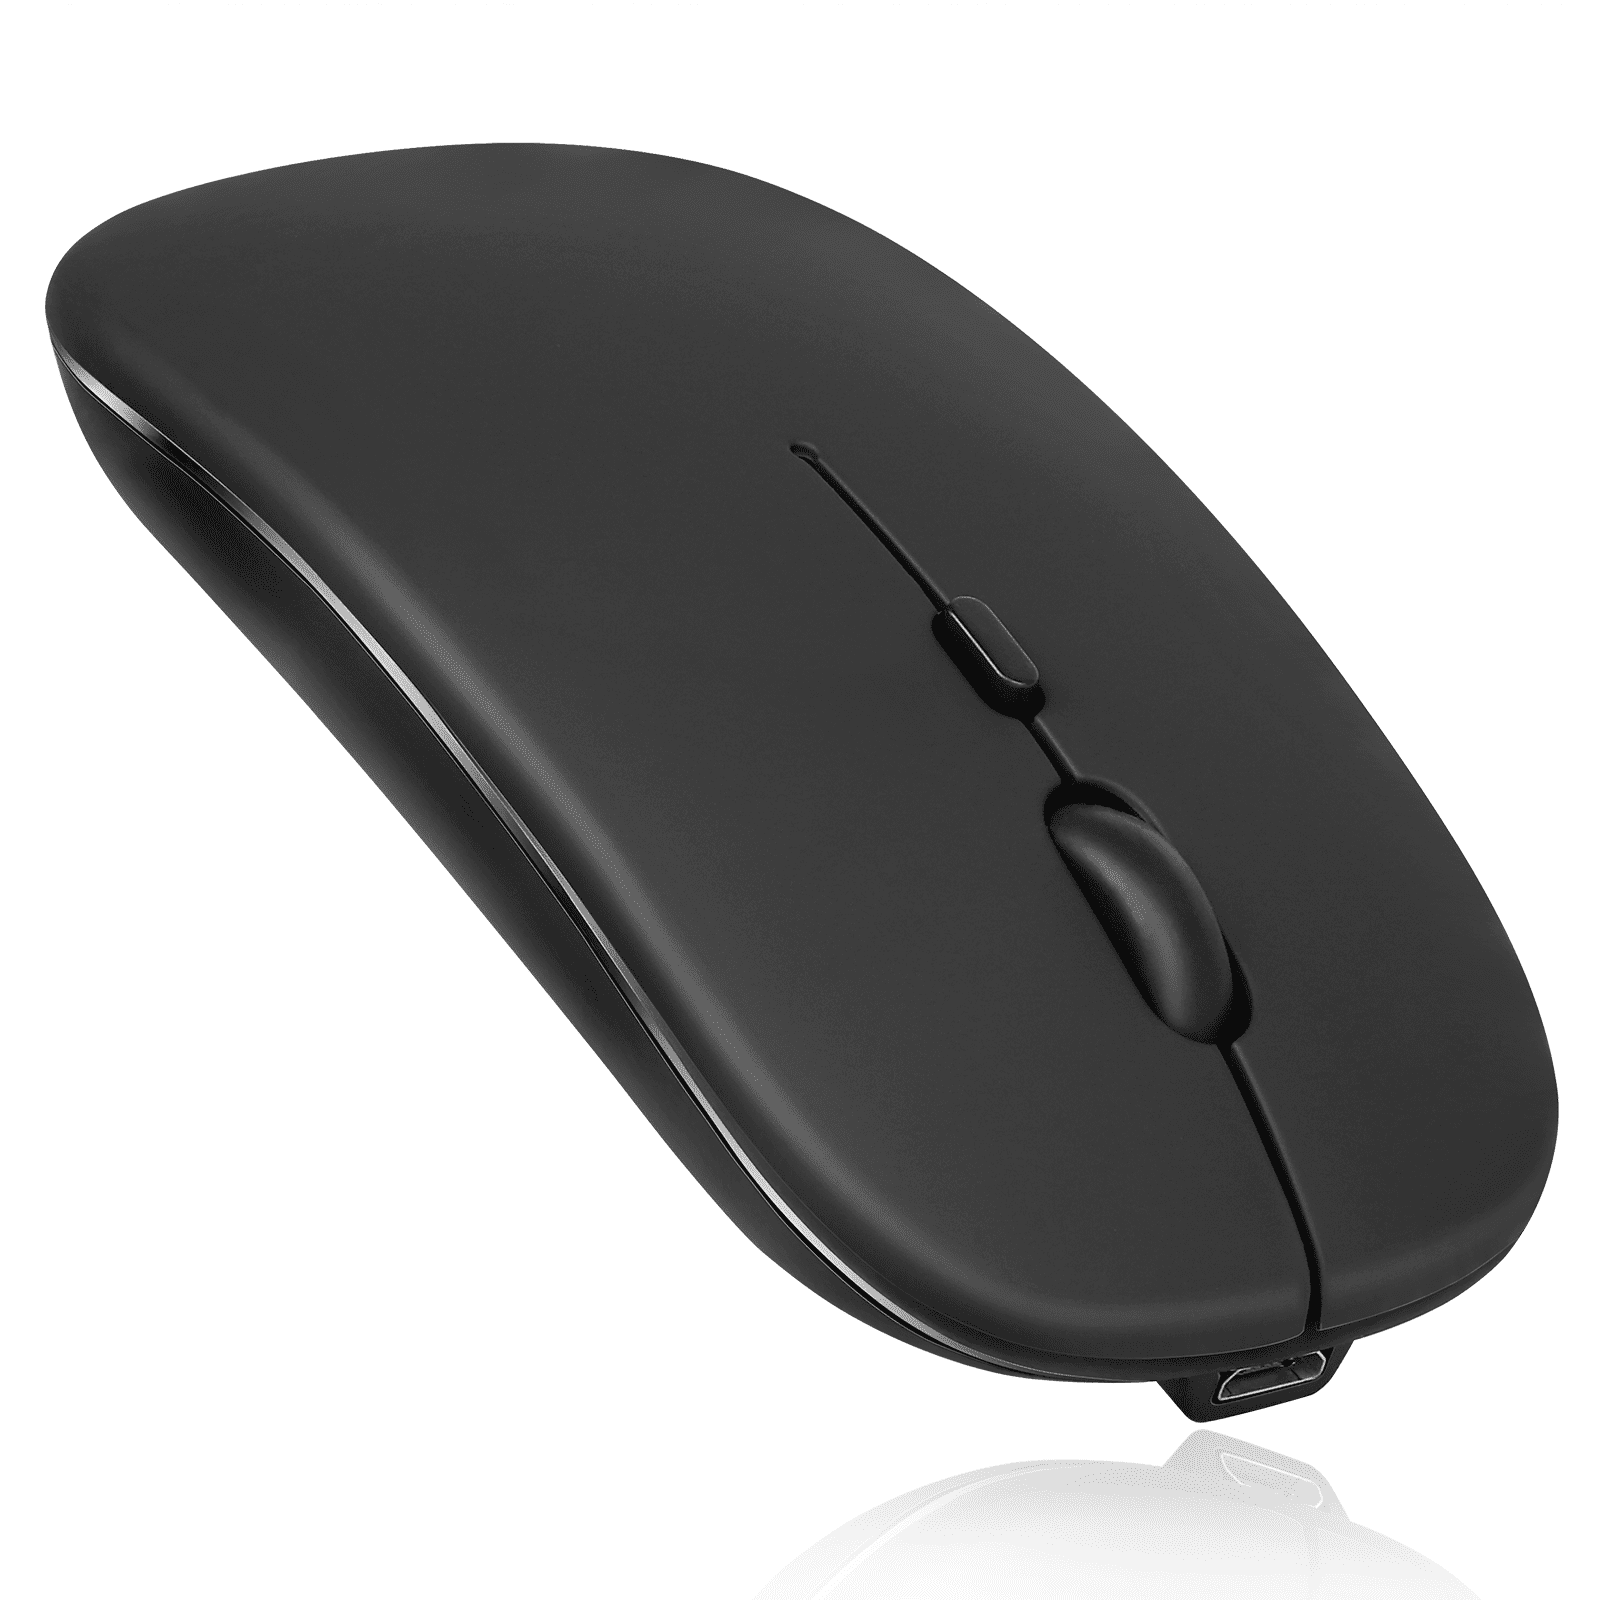 zoete smaak Passend Sluimeren Bluetooth Rechargeable Mouse for Dell Precision 3000 3561 Laptop Bluetooth  Wireless Mouse Designed for Laptop / PC / Mac / iPad pro / Computer /  Tablet / Android Onyx Black - Walmart.com